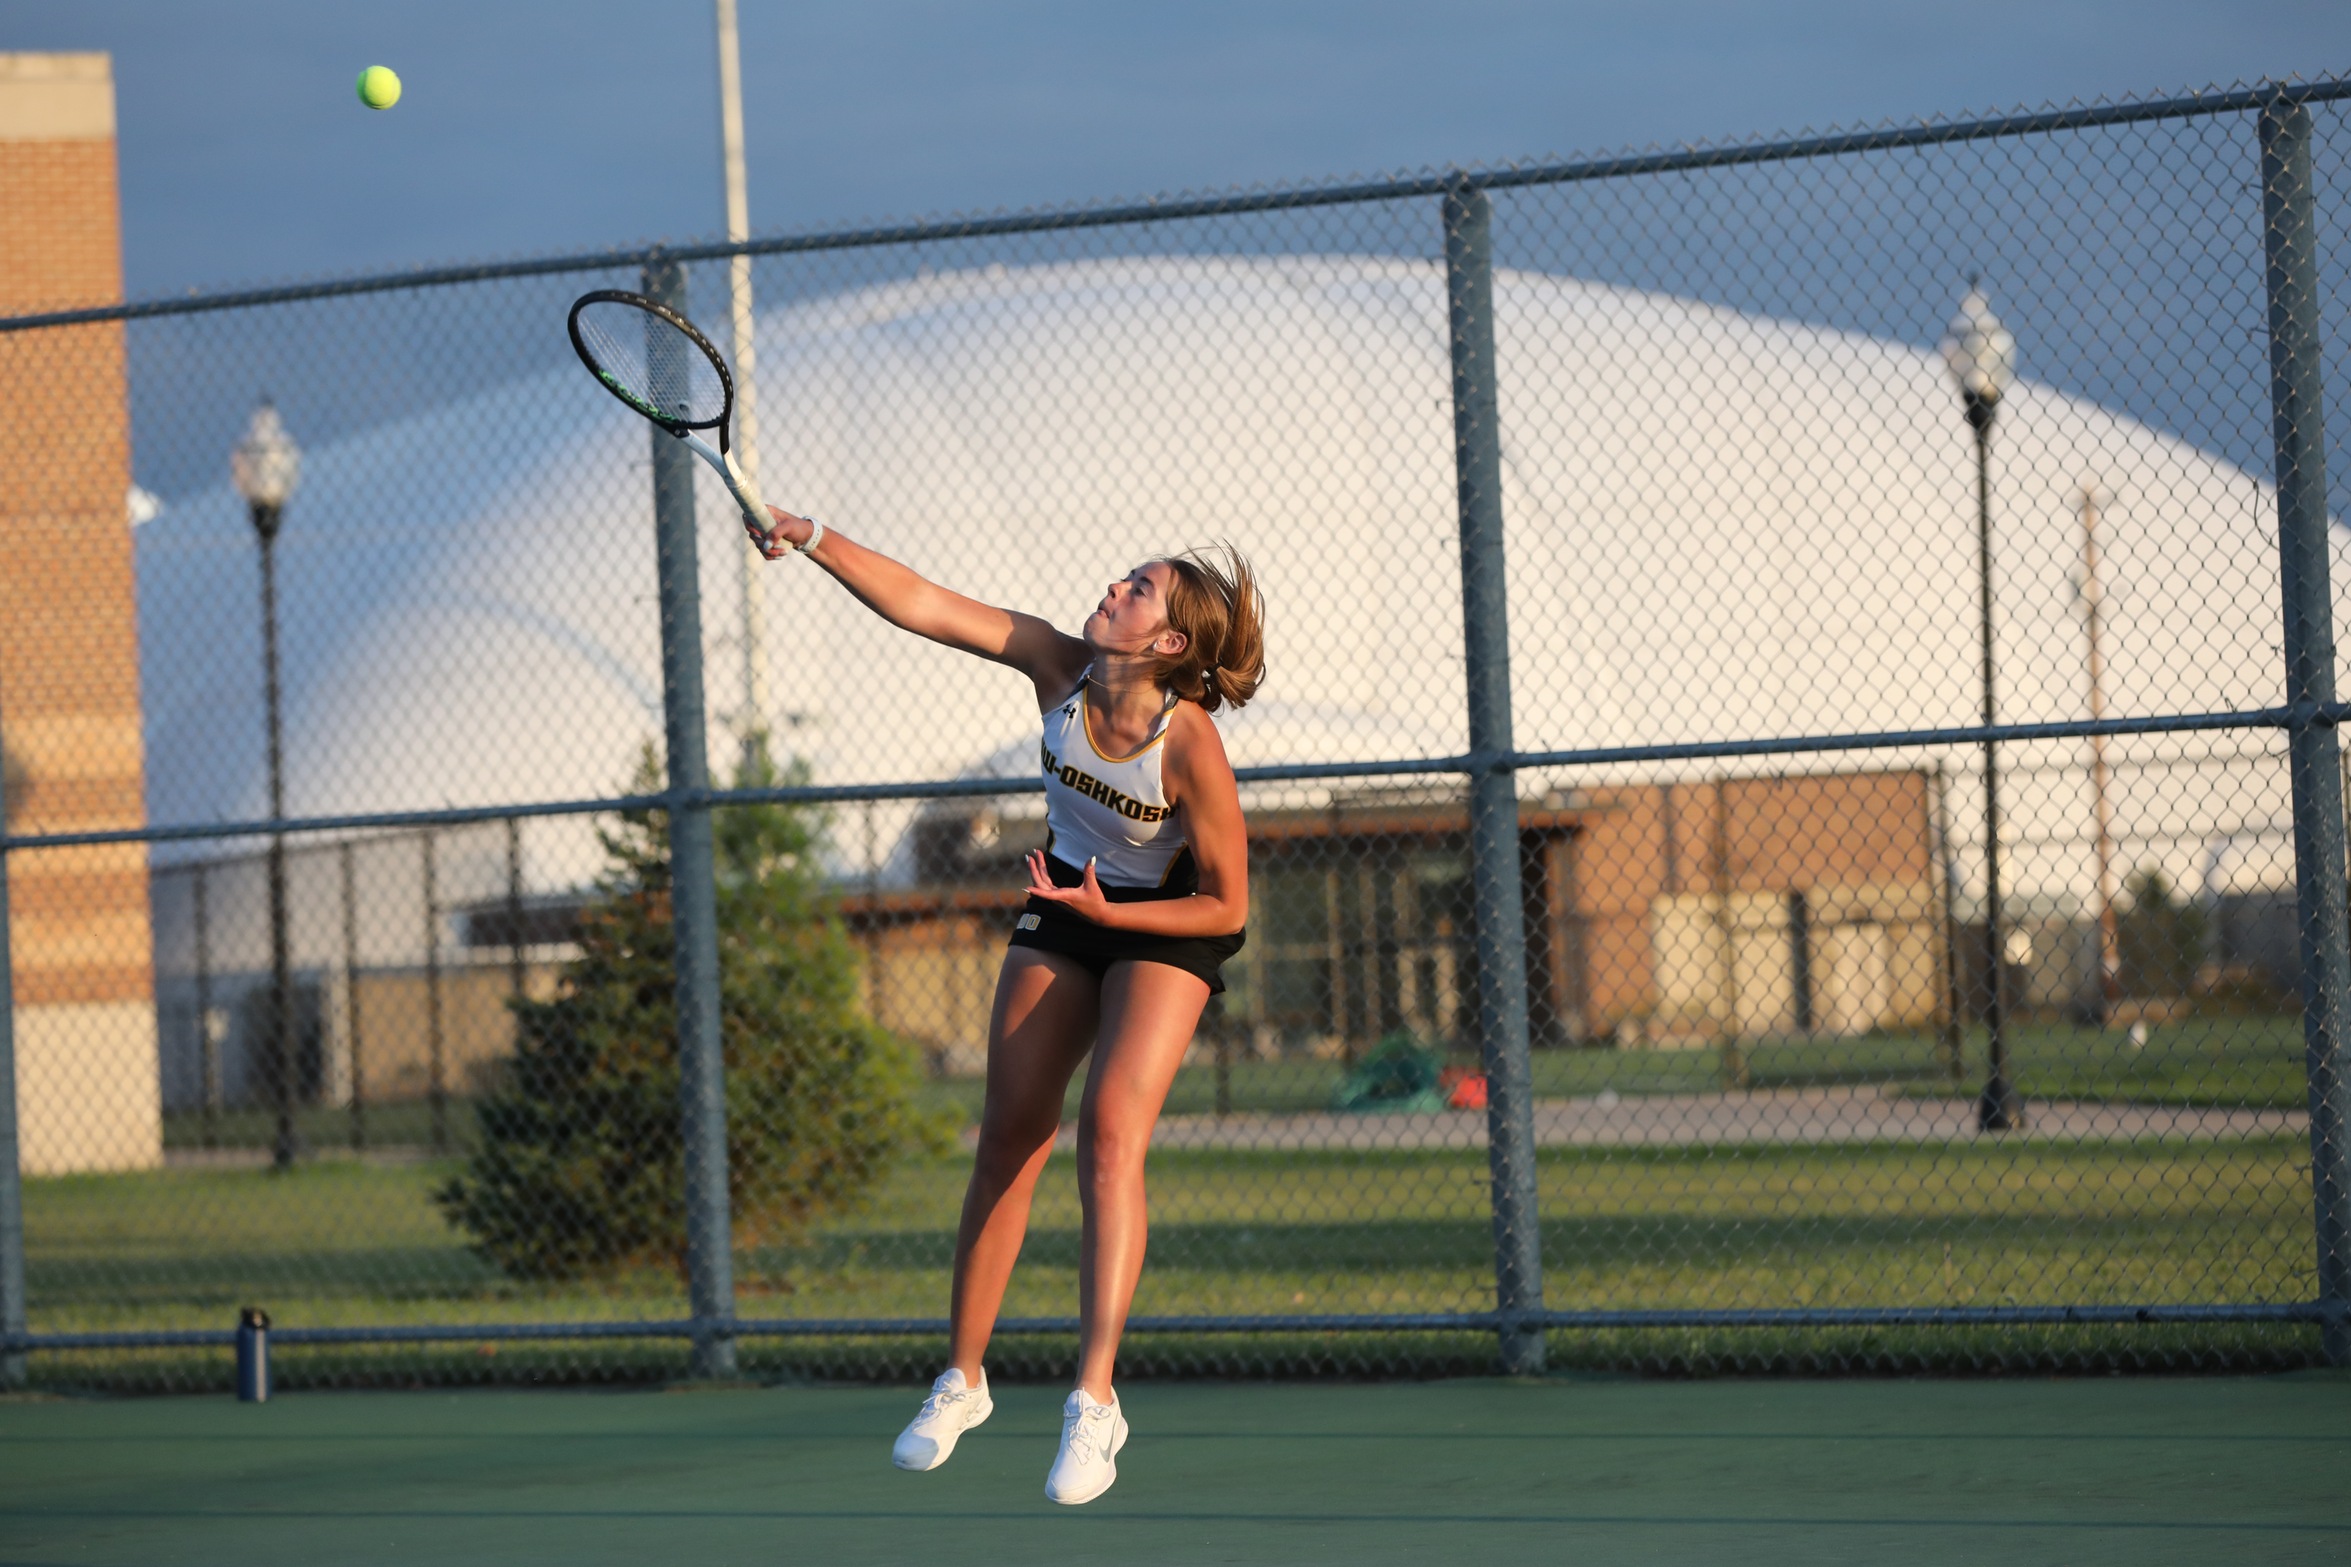 Alysa Pattee won her singles match in comeback fashion against Lawrence University.